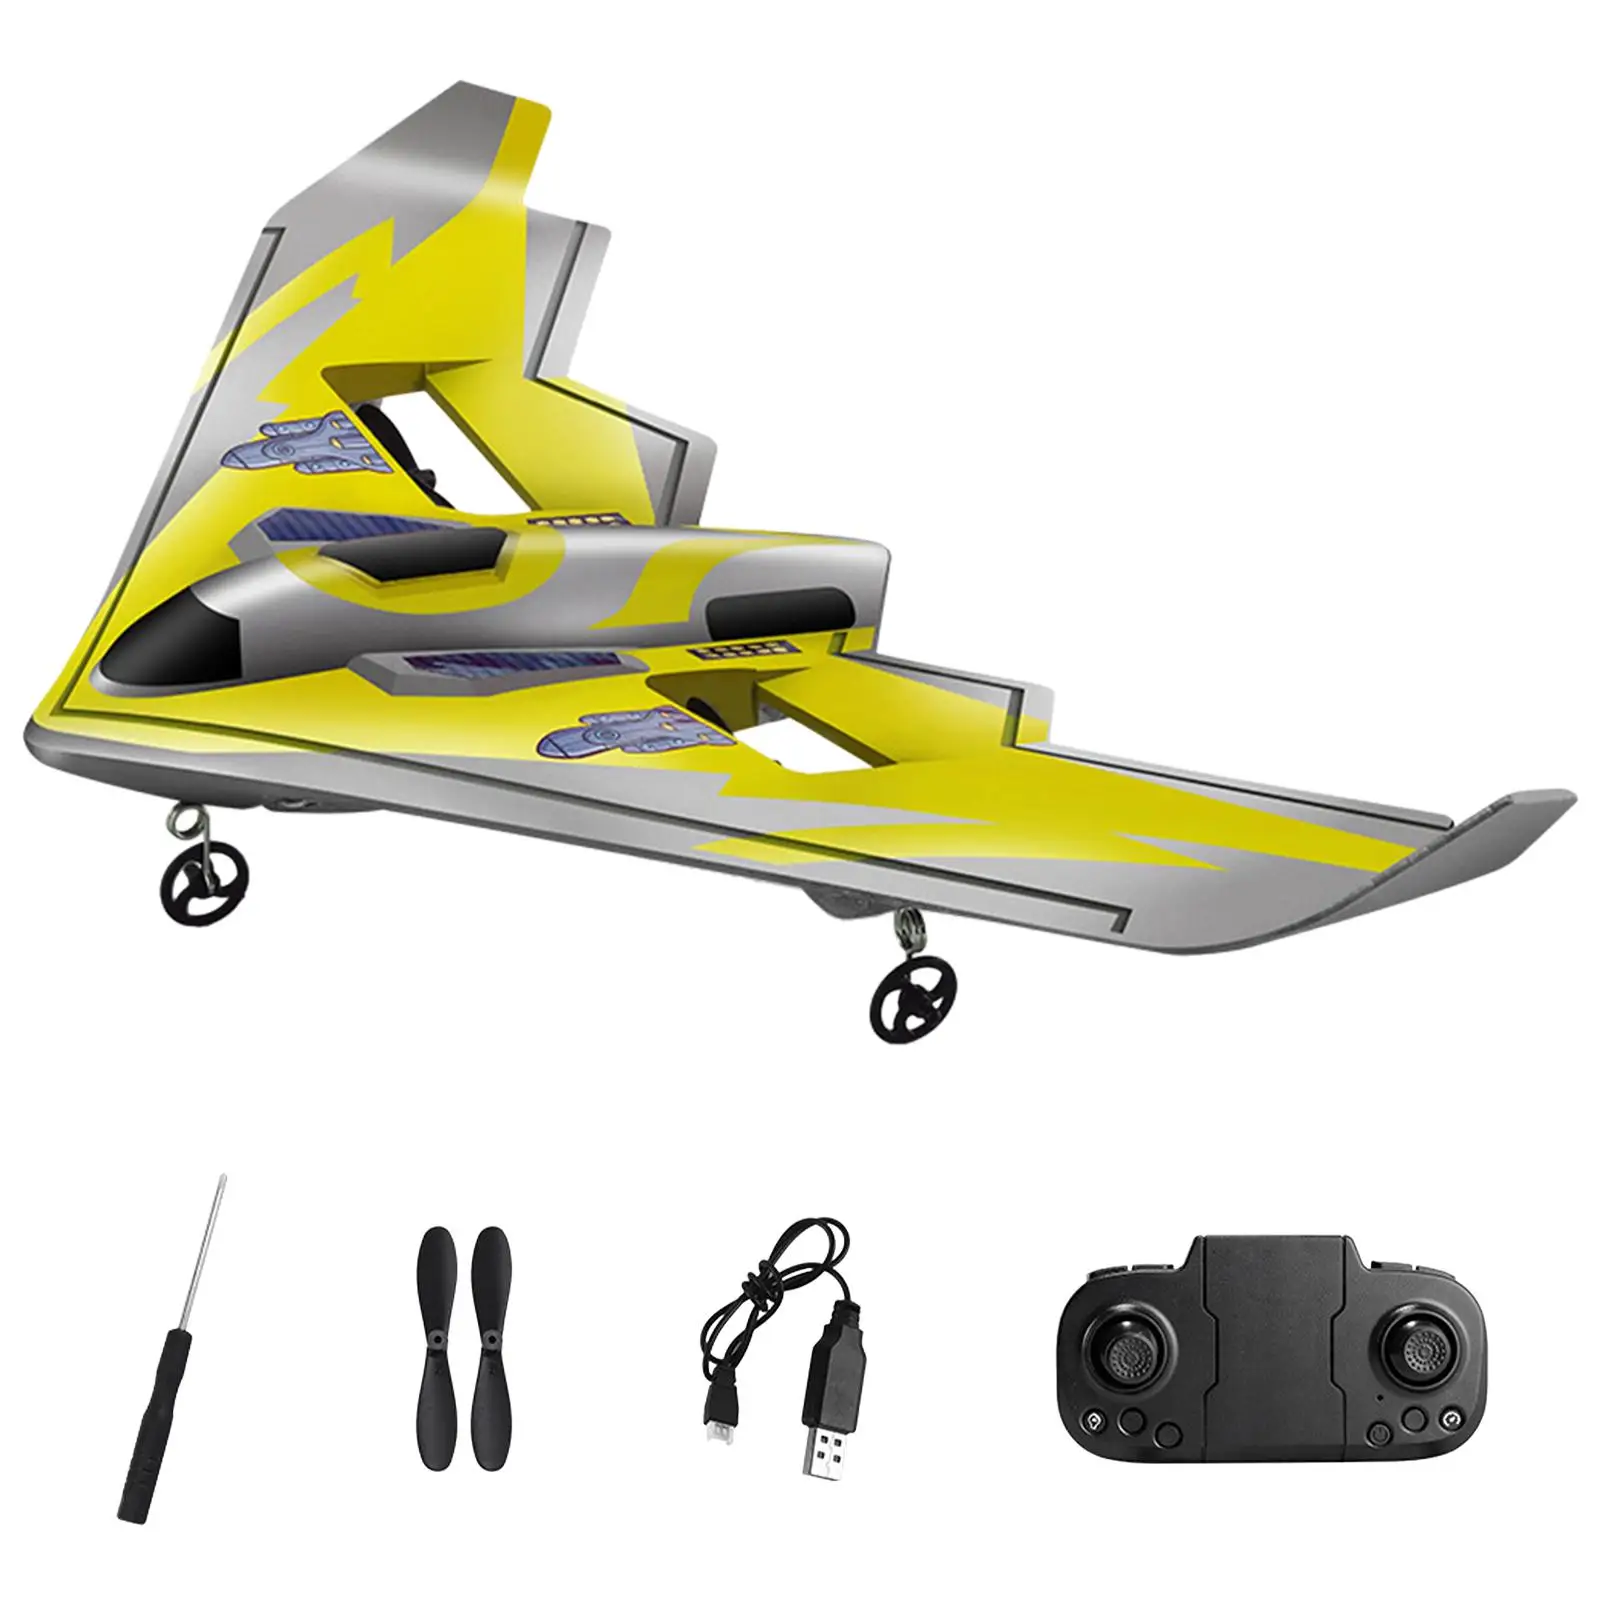 EPP Foam Remote Control Airplane Ready to Fly DIY for Kids Adults Beginners